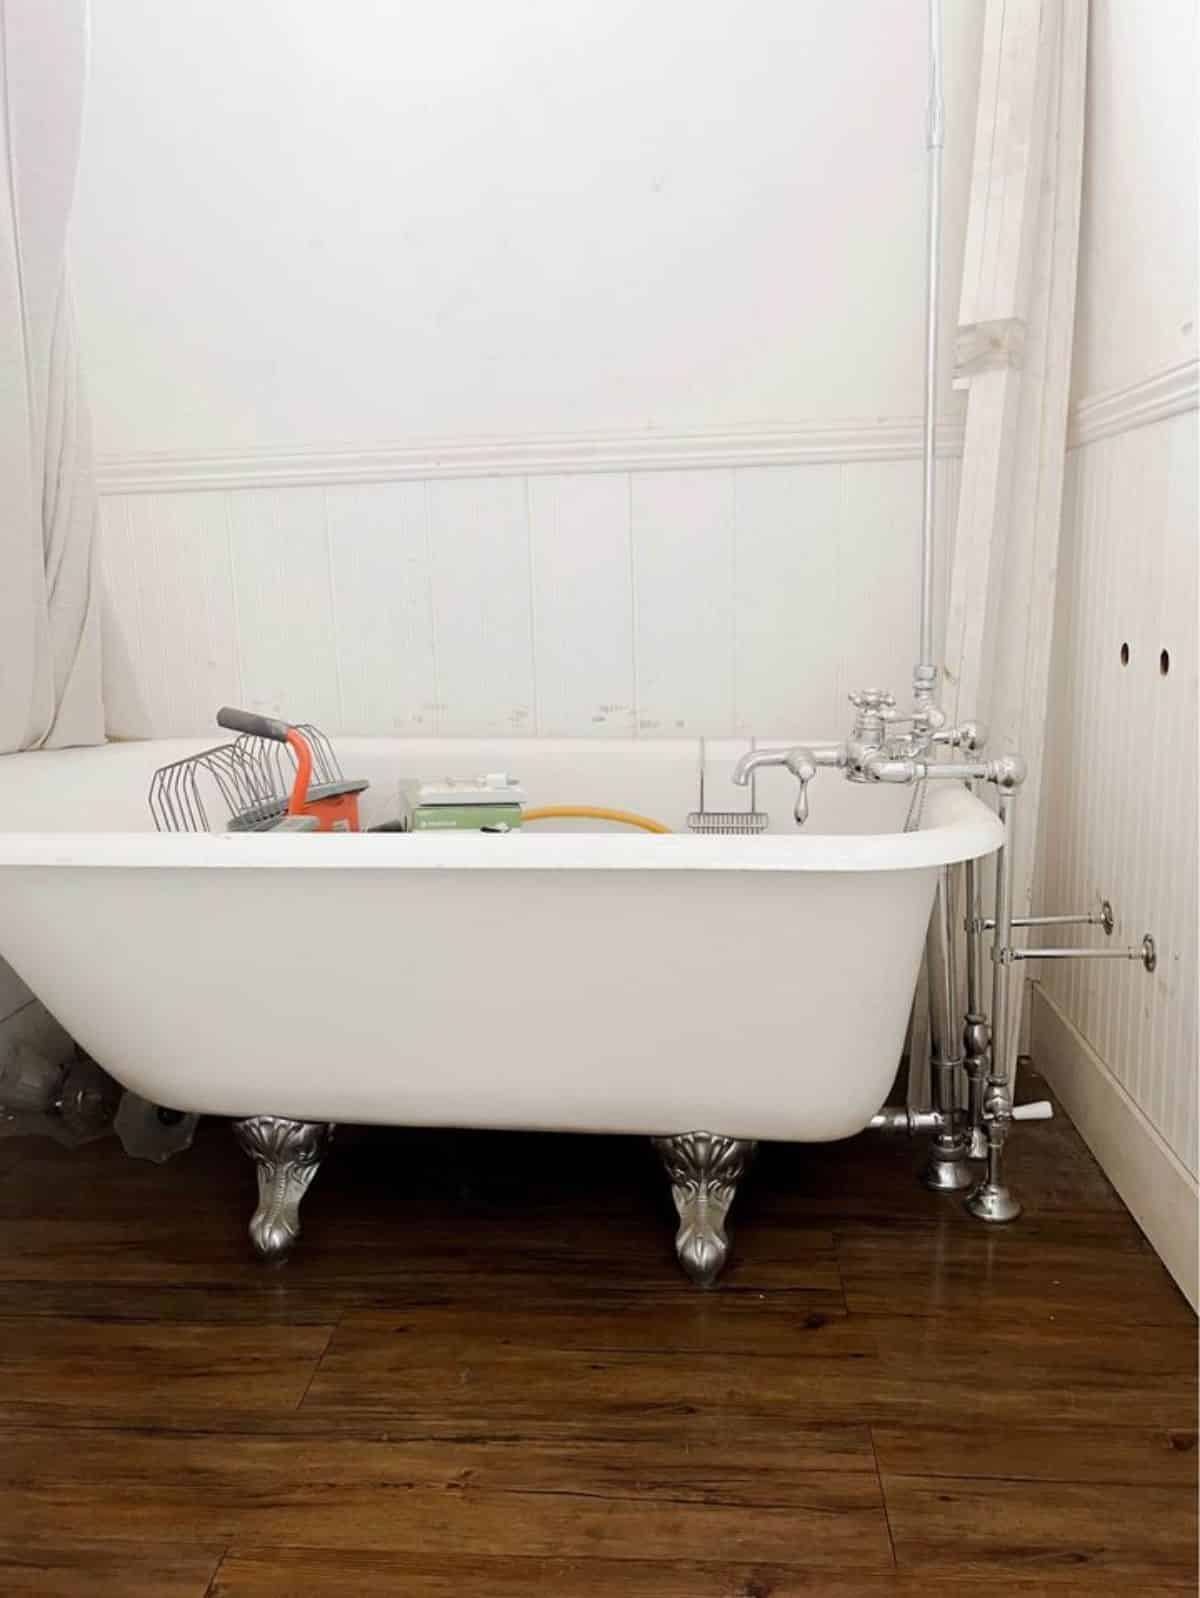 Bathtub is also included into the deal